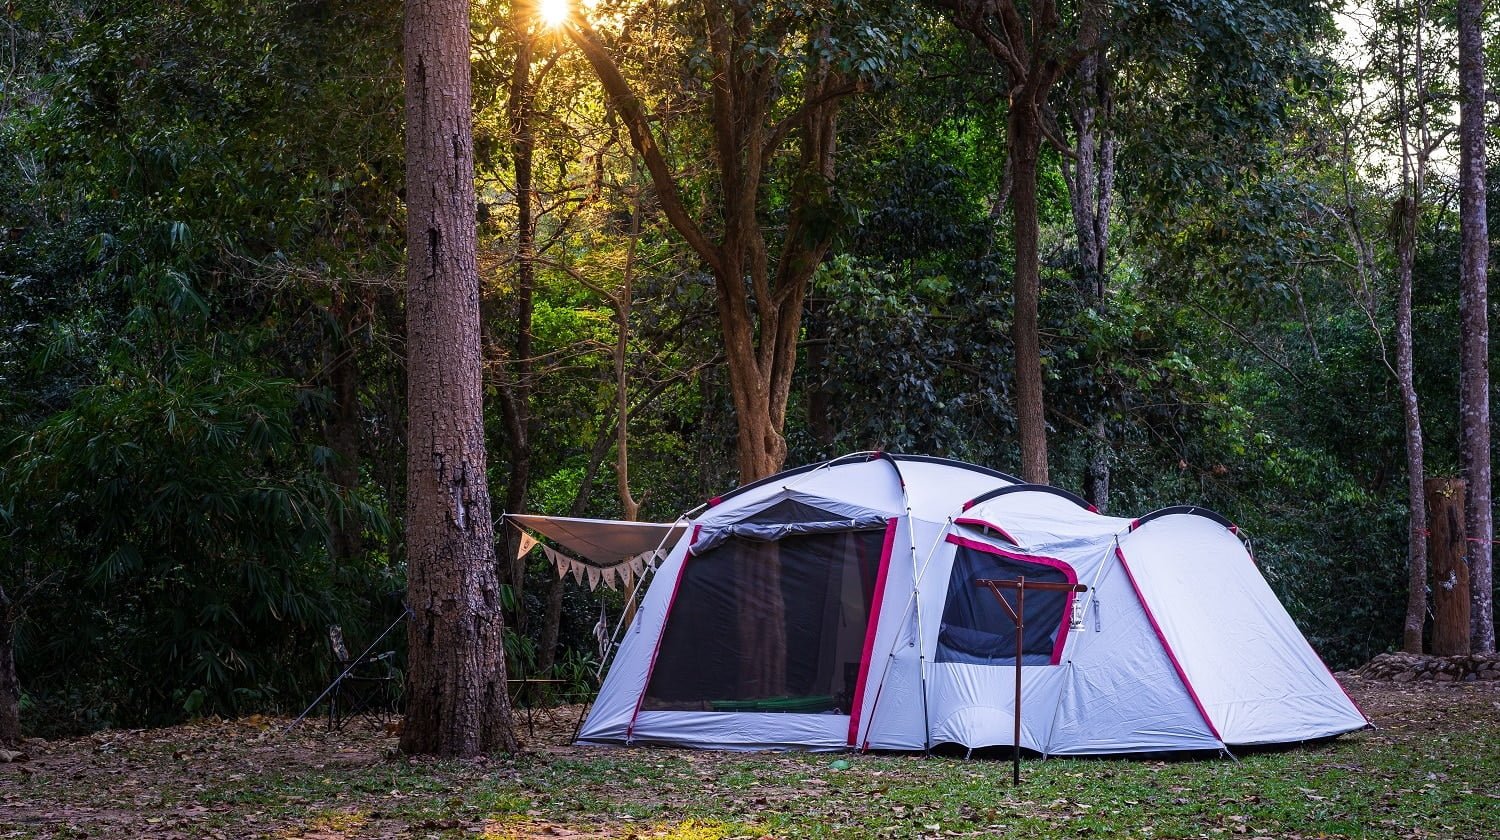 Camping and tent in nature park with sunset